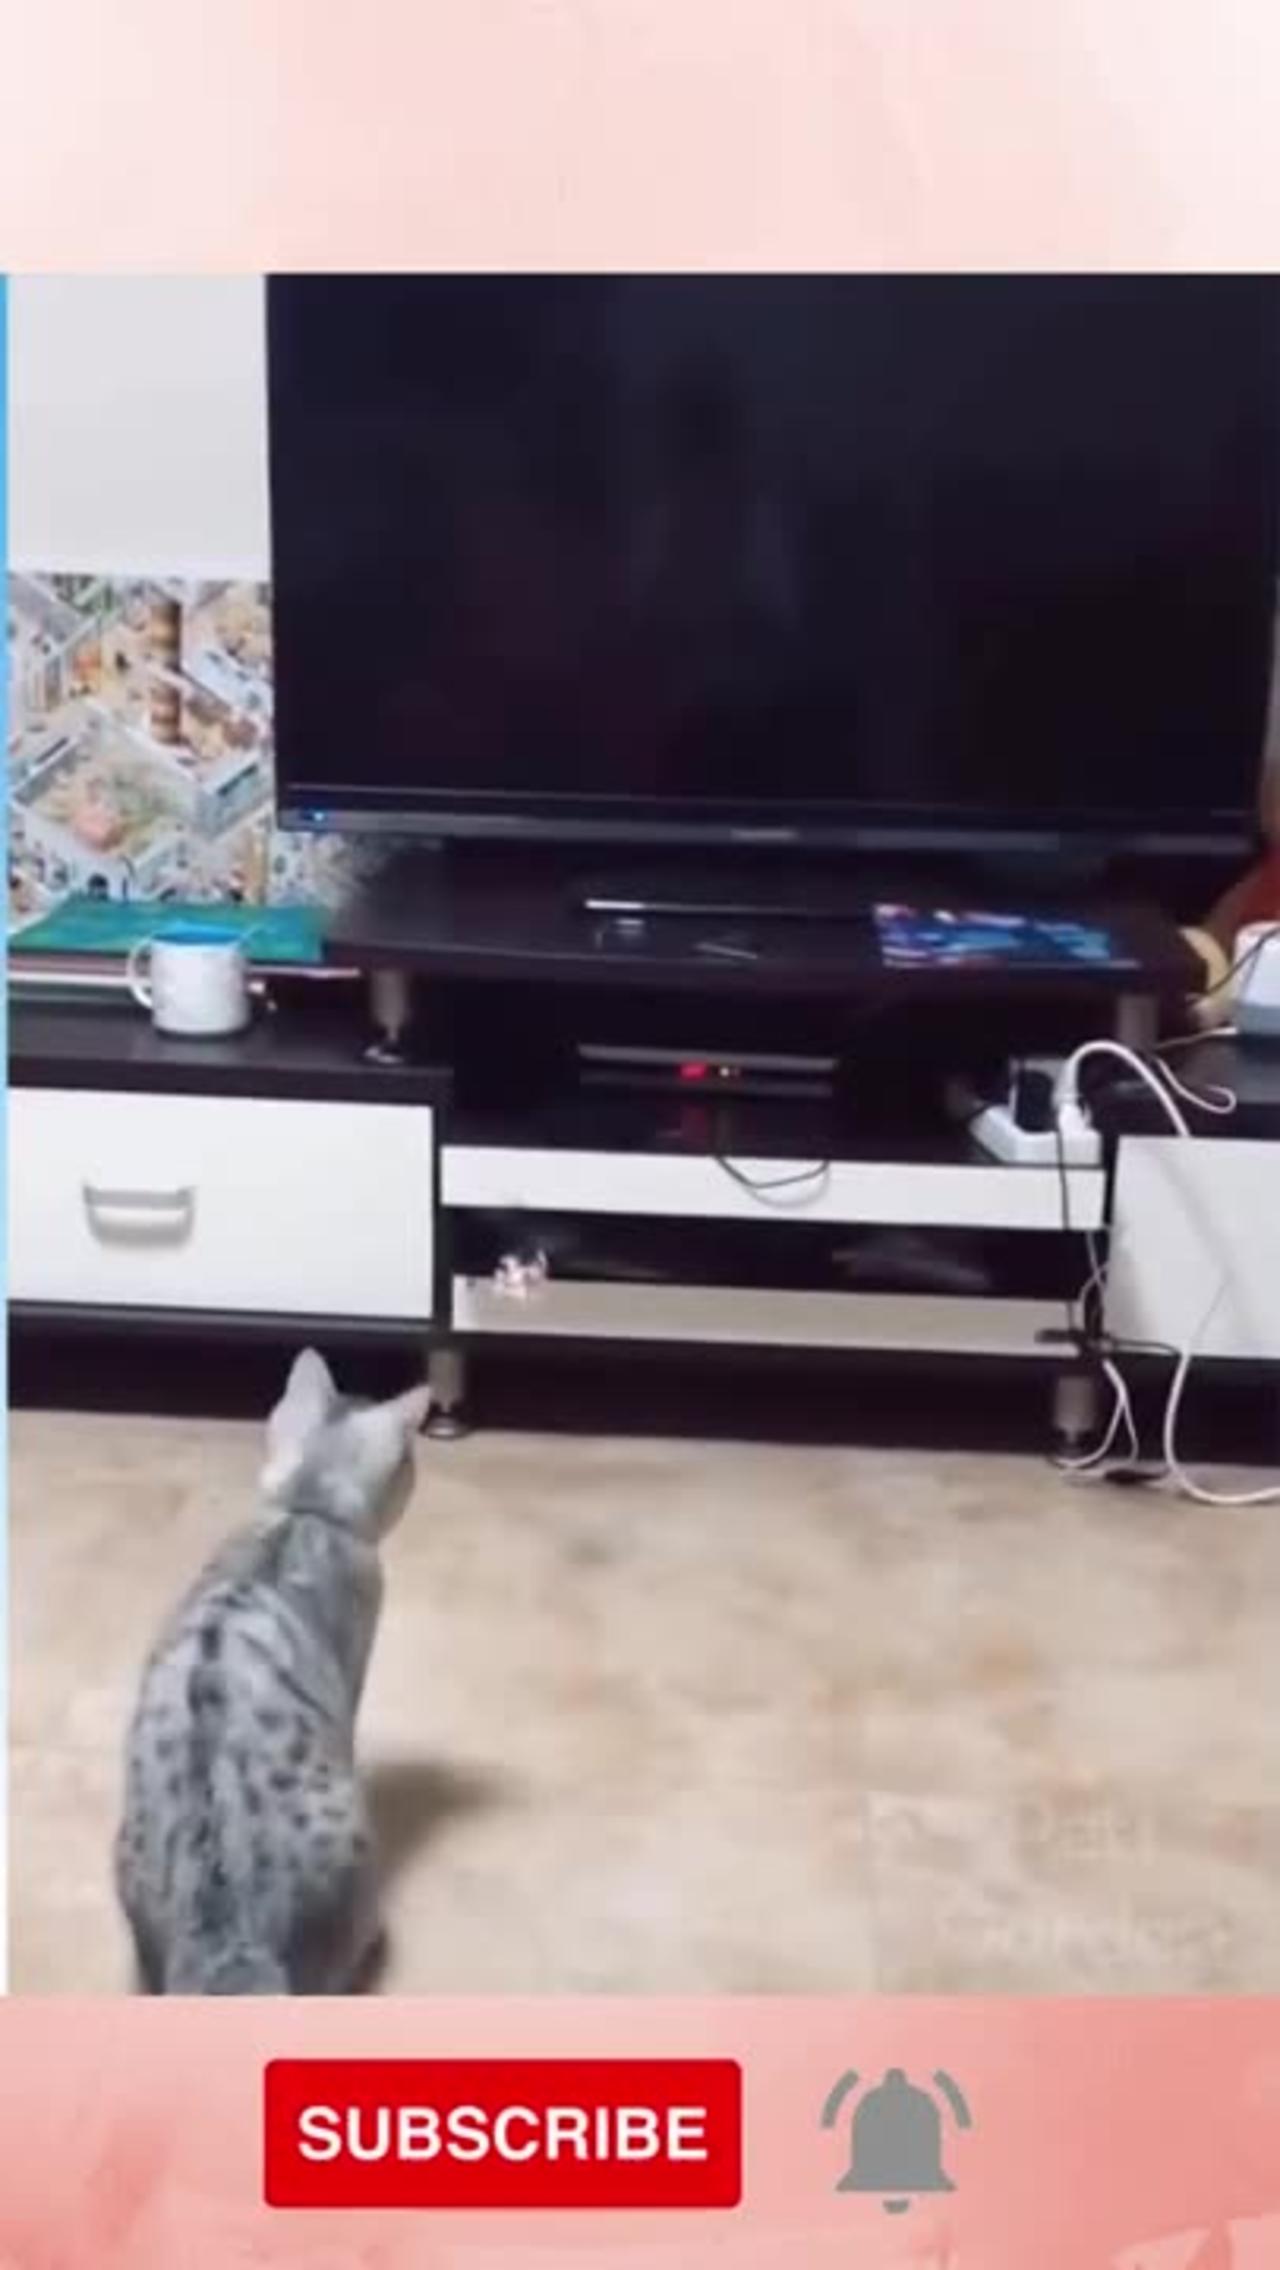 The Most Hilarious Pet Videos on the Internet